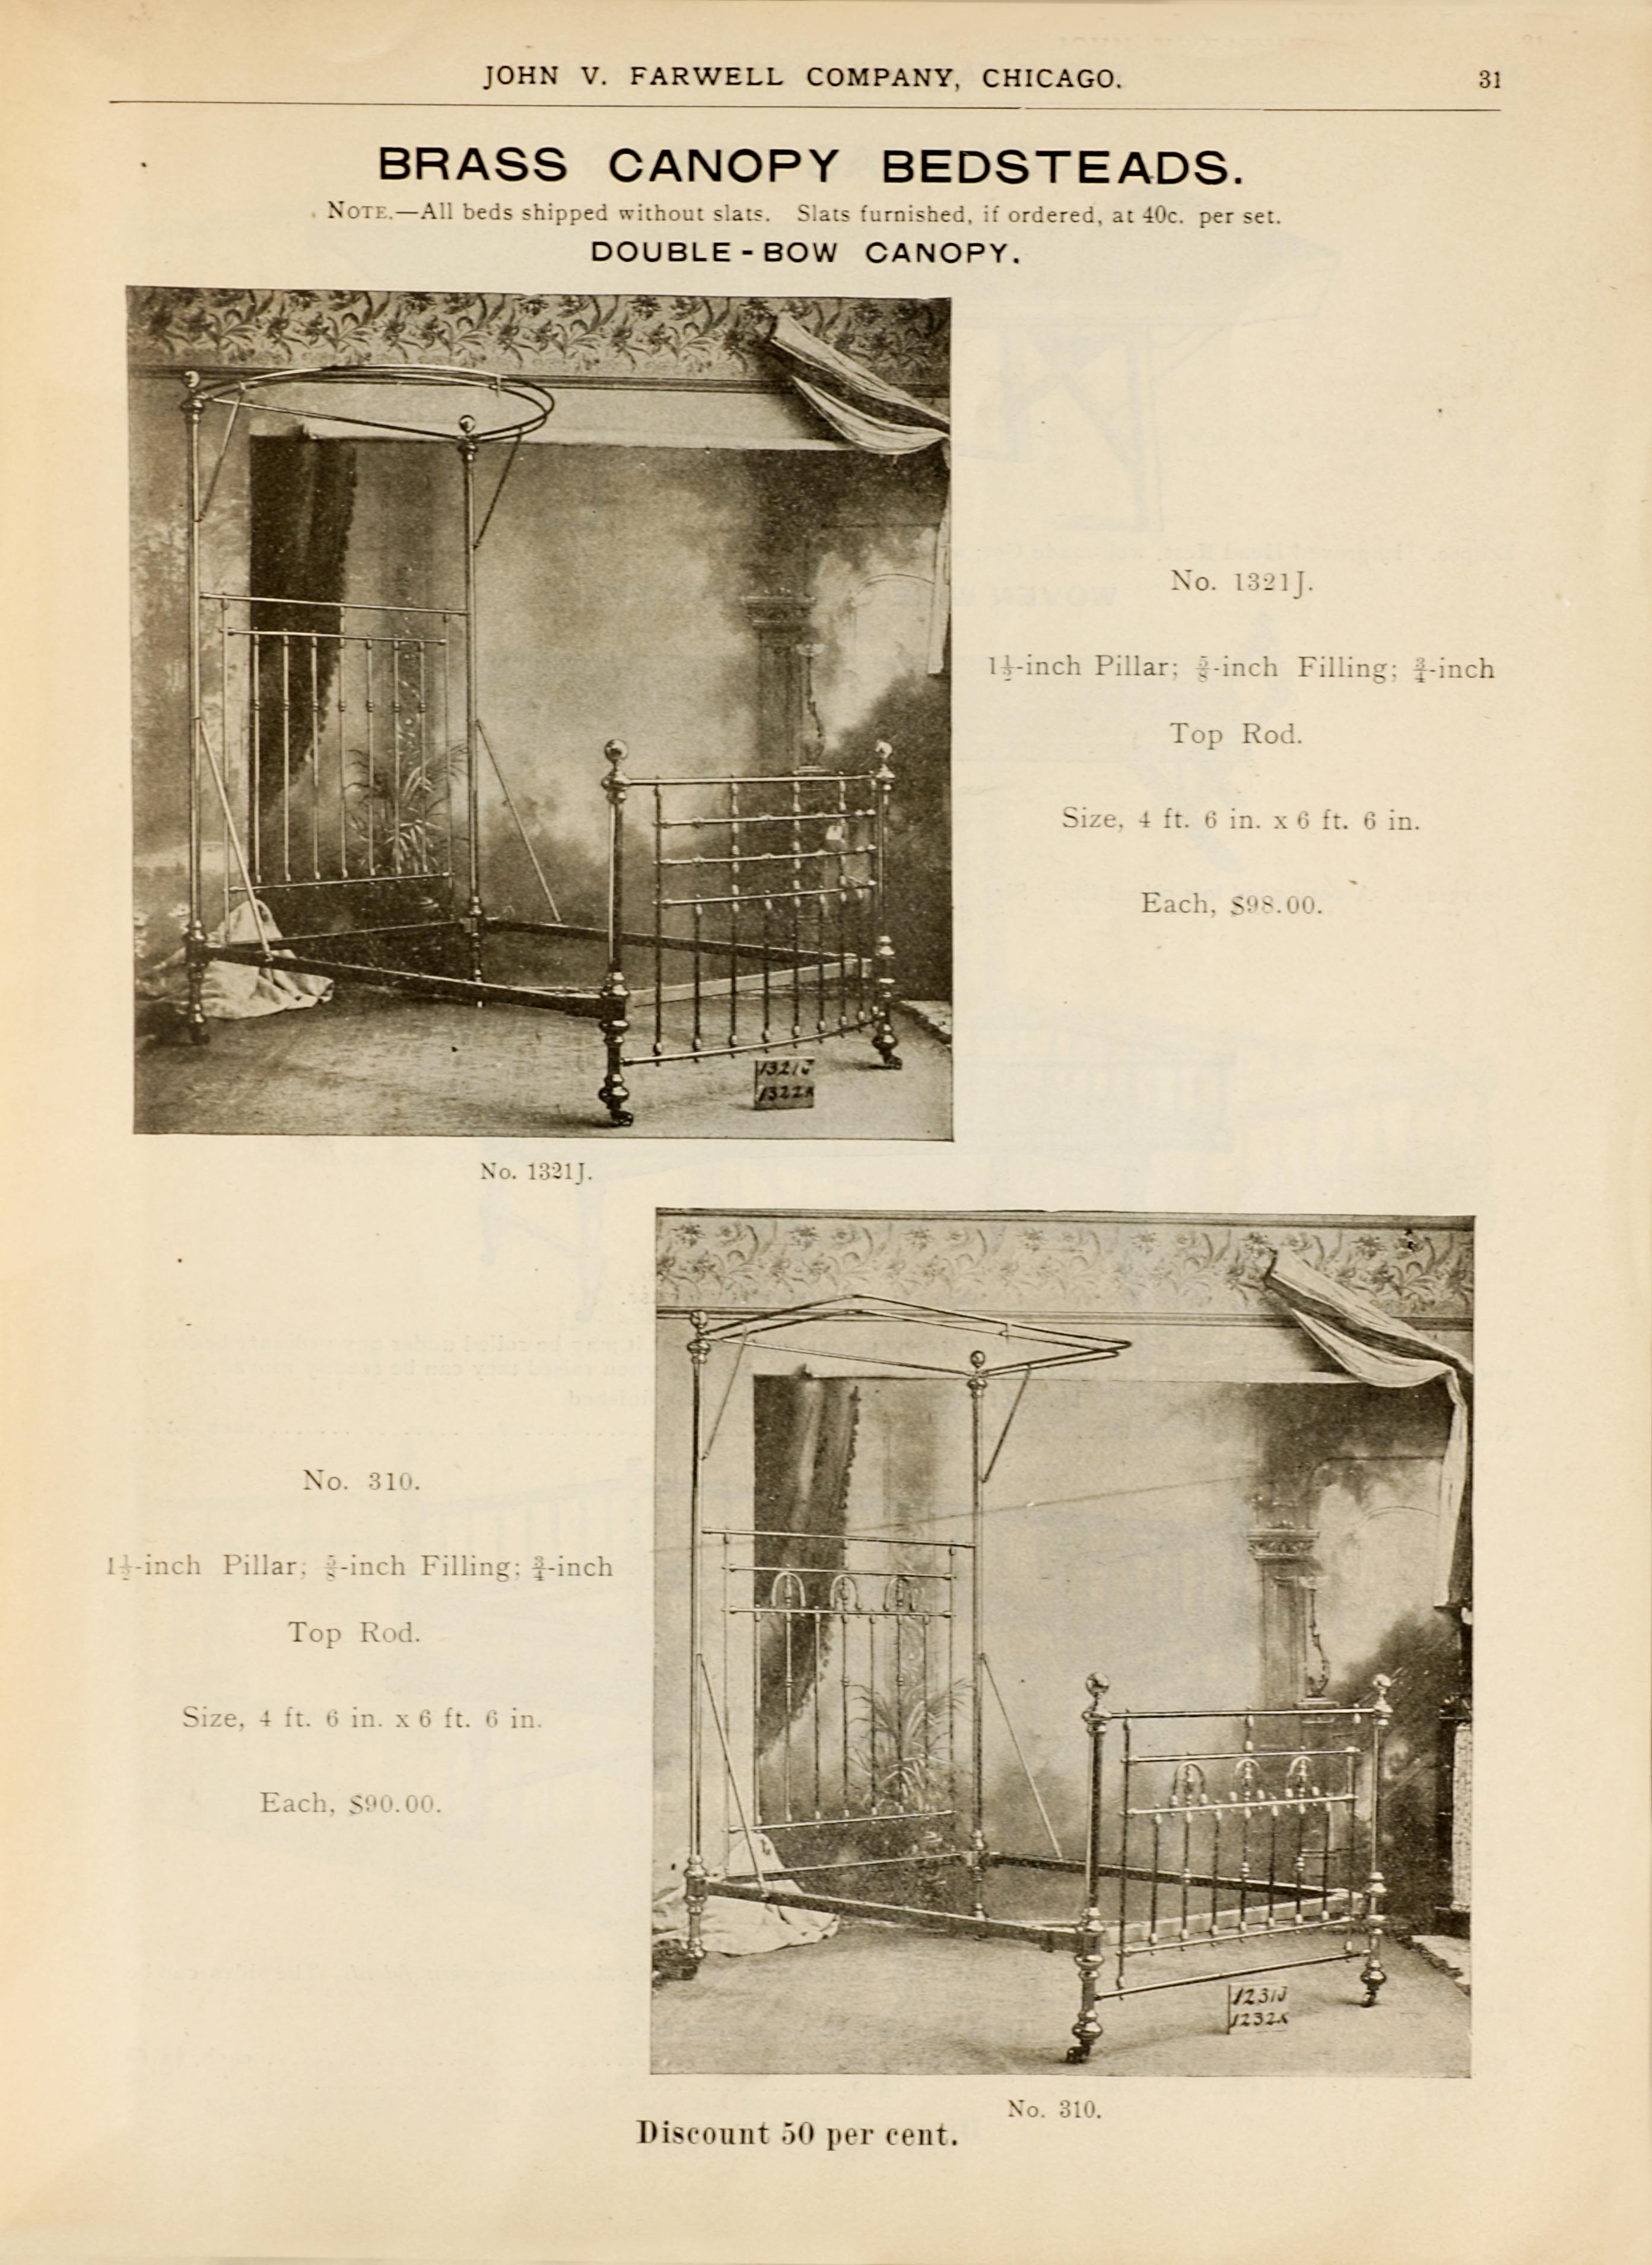 John V. Farwell Iron Bed Catalog, Chicago 1895- Page 23